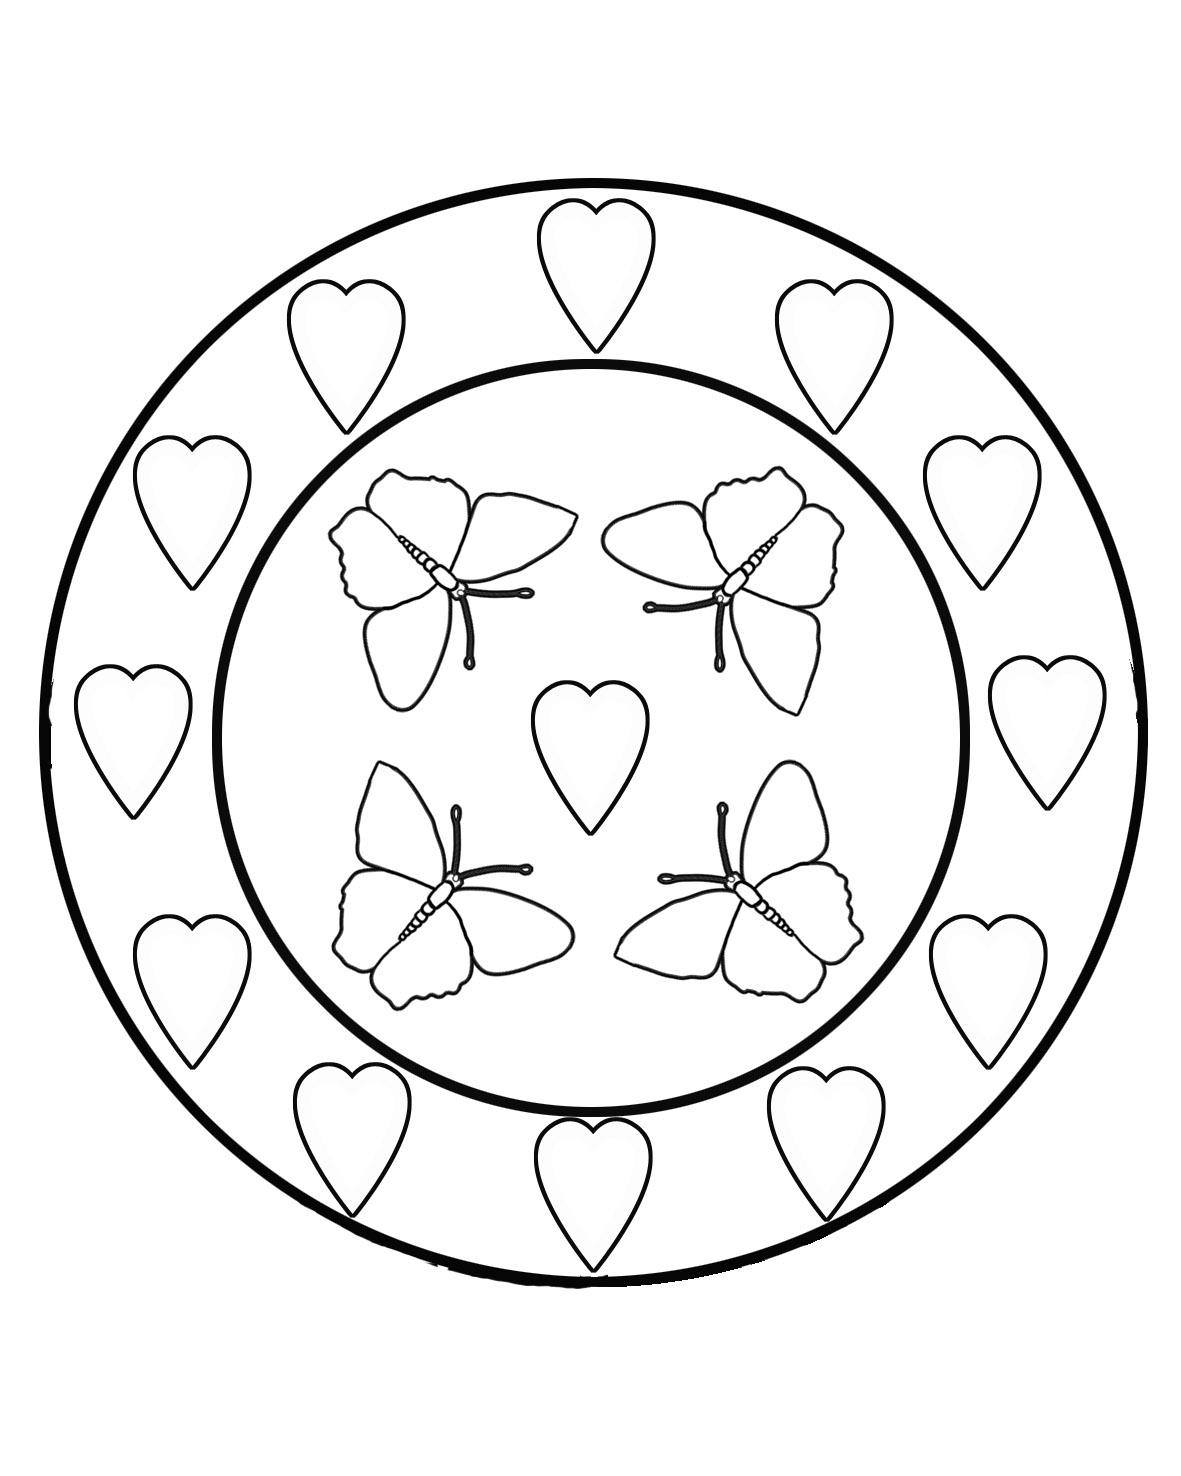 butterfly coloring pages with hearts